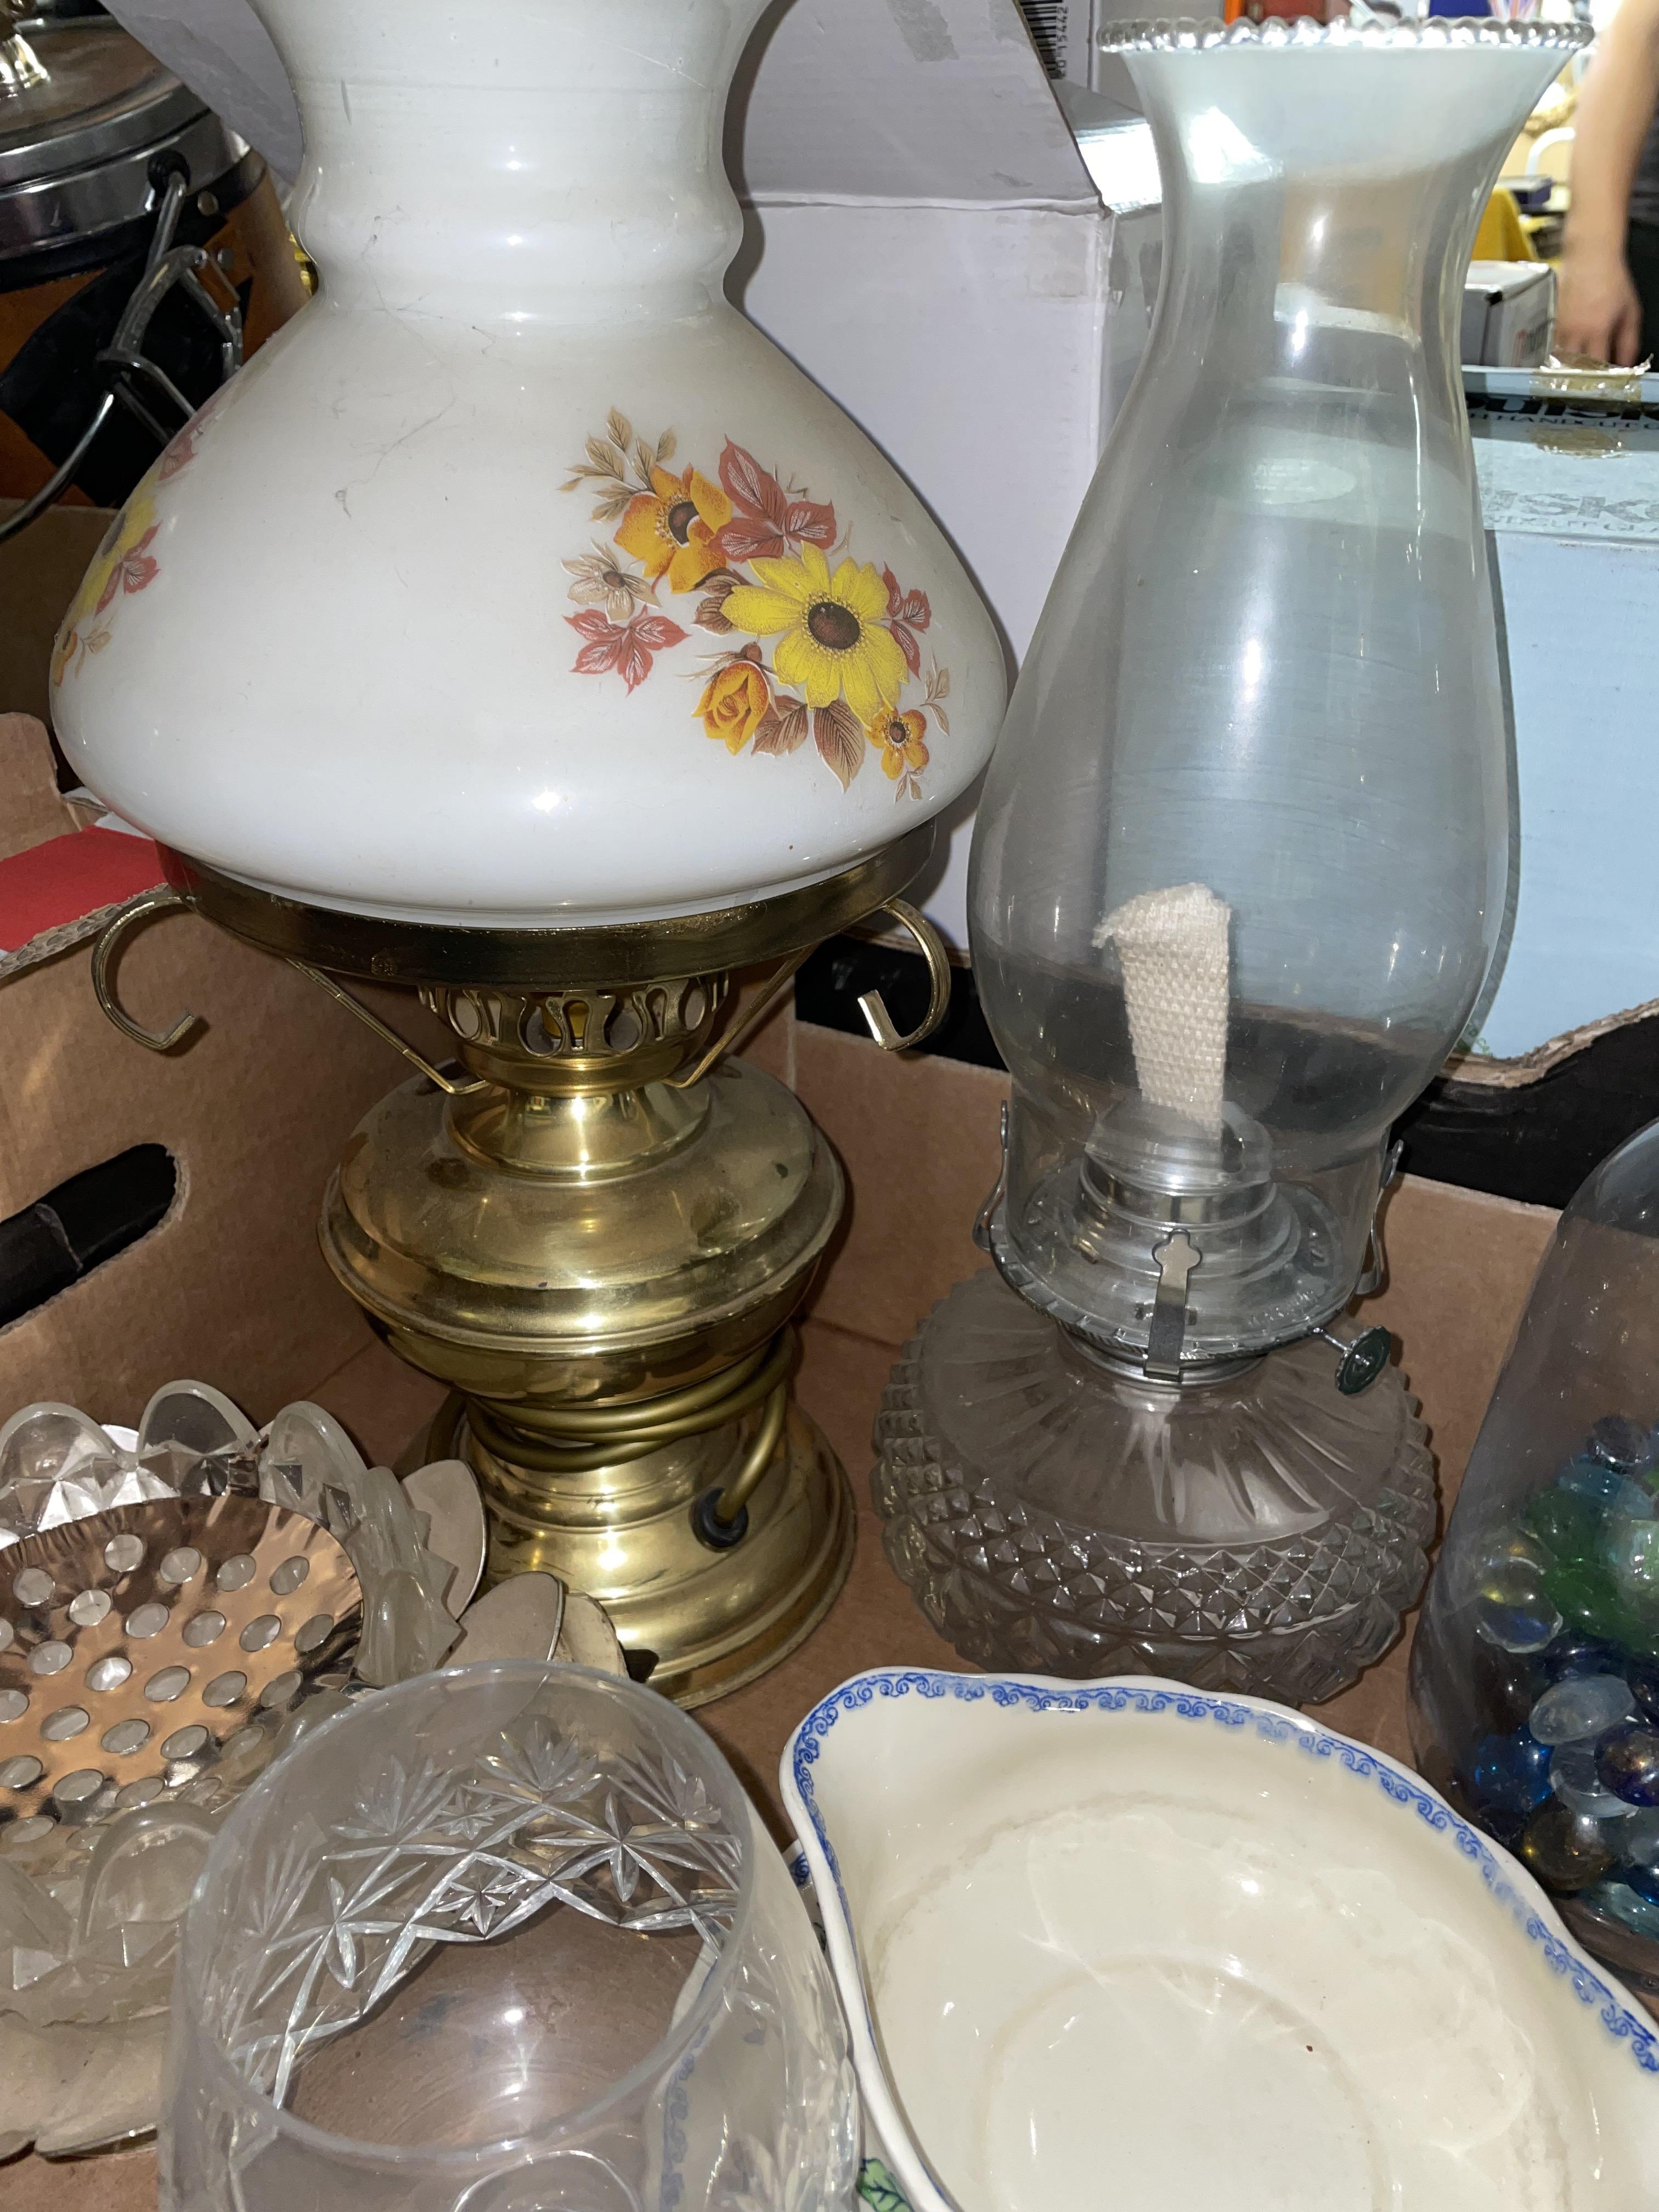 ELECTRIFIED OIL LAMP, PARAFFIN LAMP, GLASS PEBBLES IN VASE, - Image 2 of 3